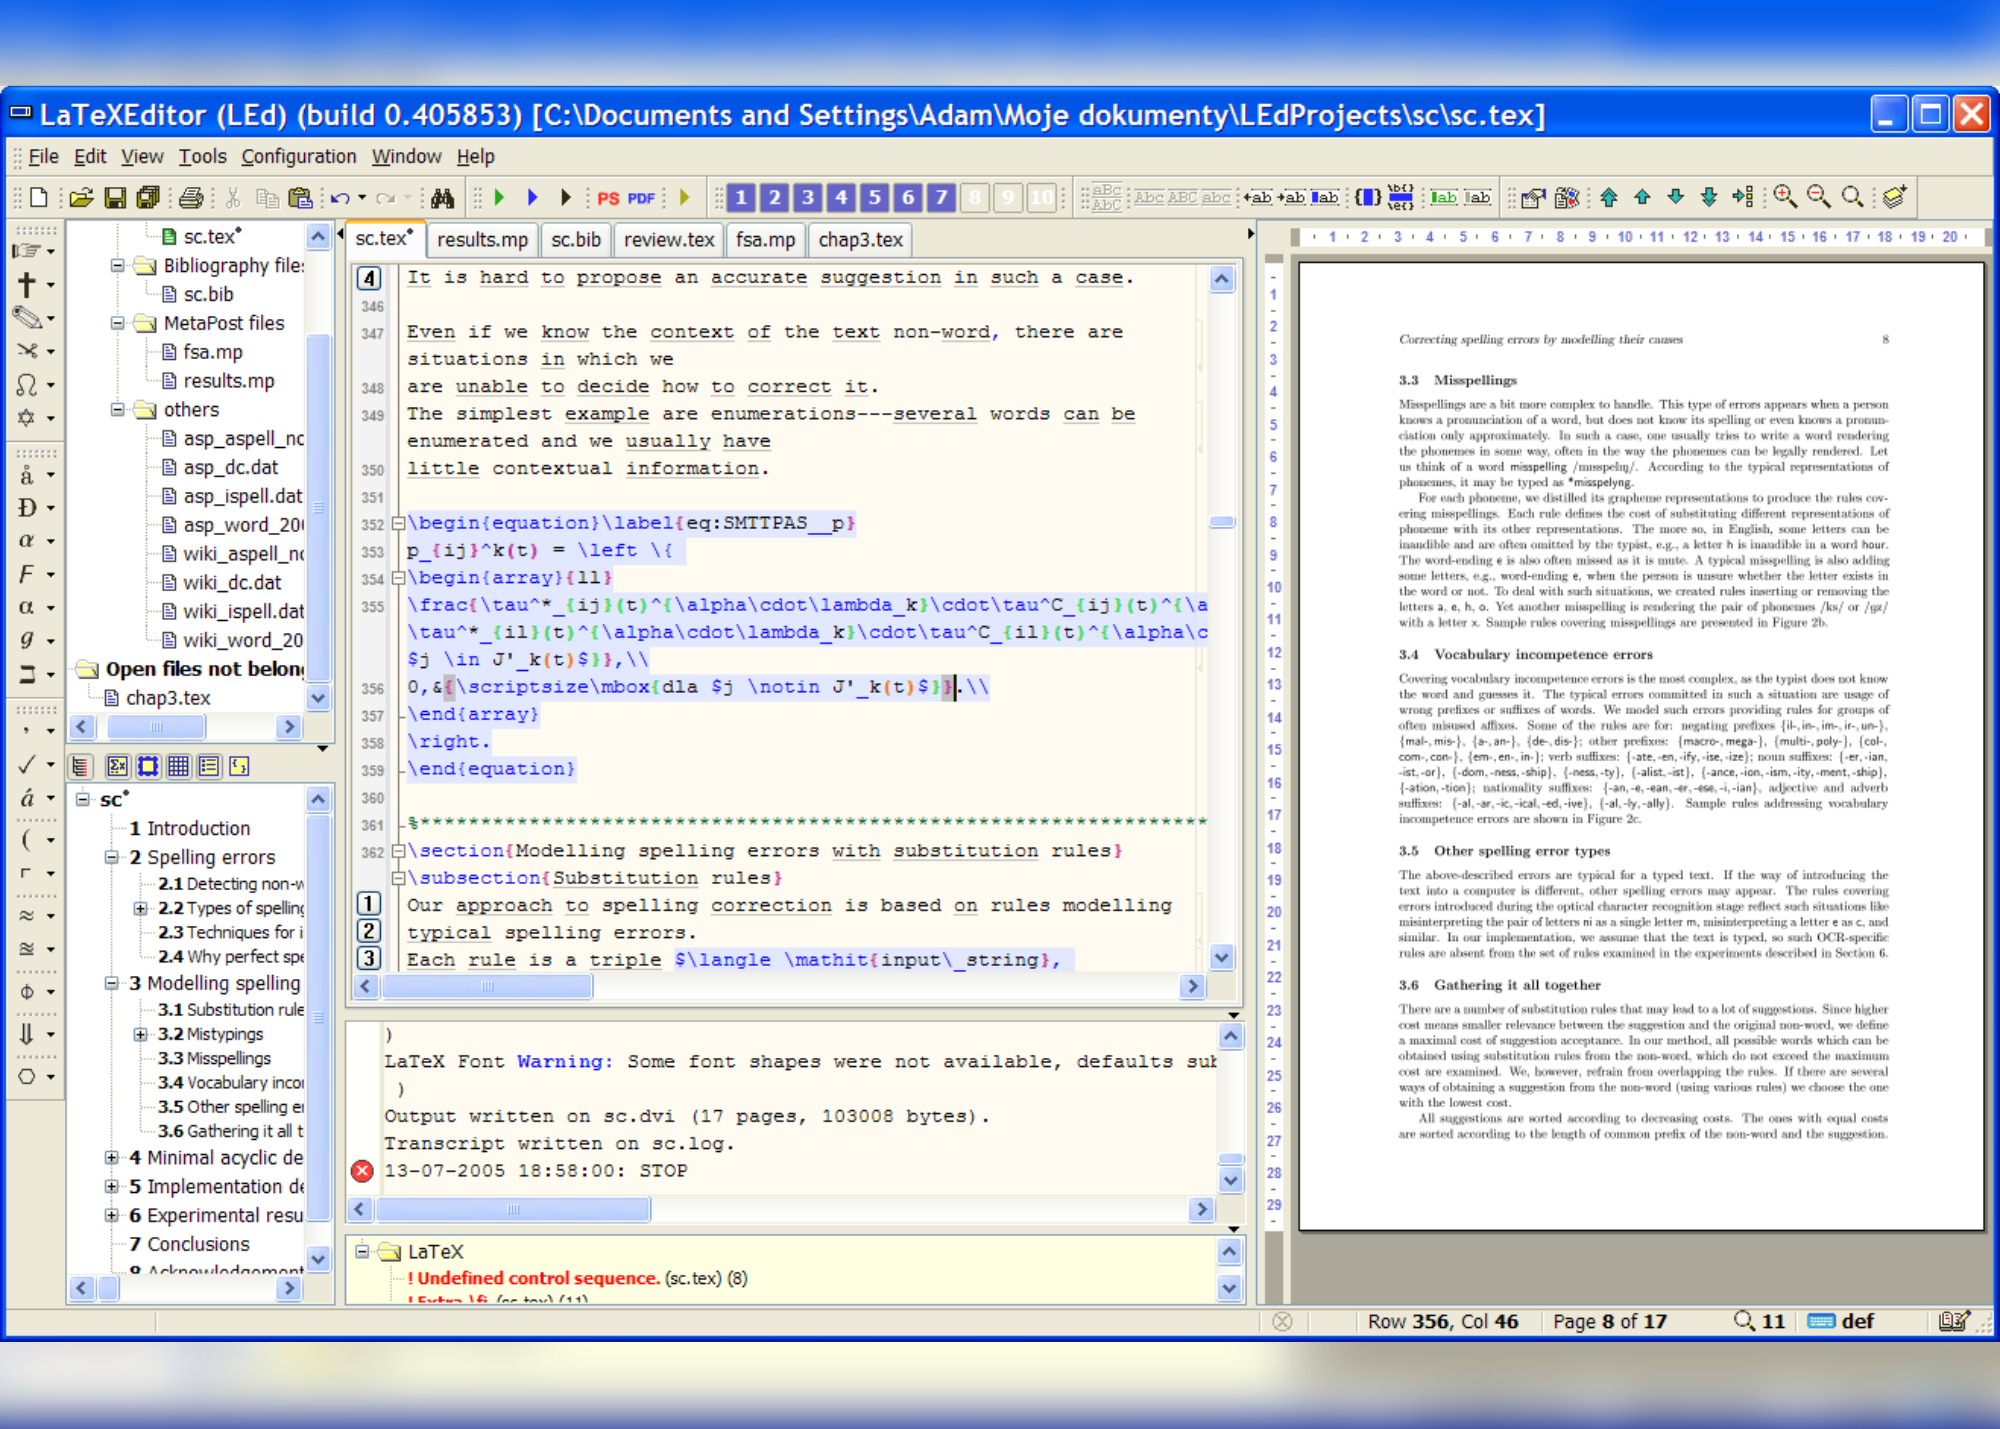 A screenshot showing codes highlighted and a draft document on the right